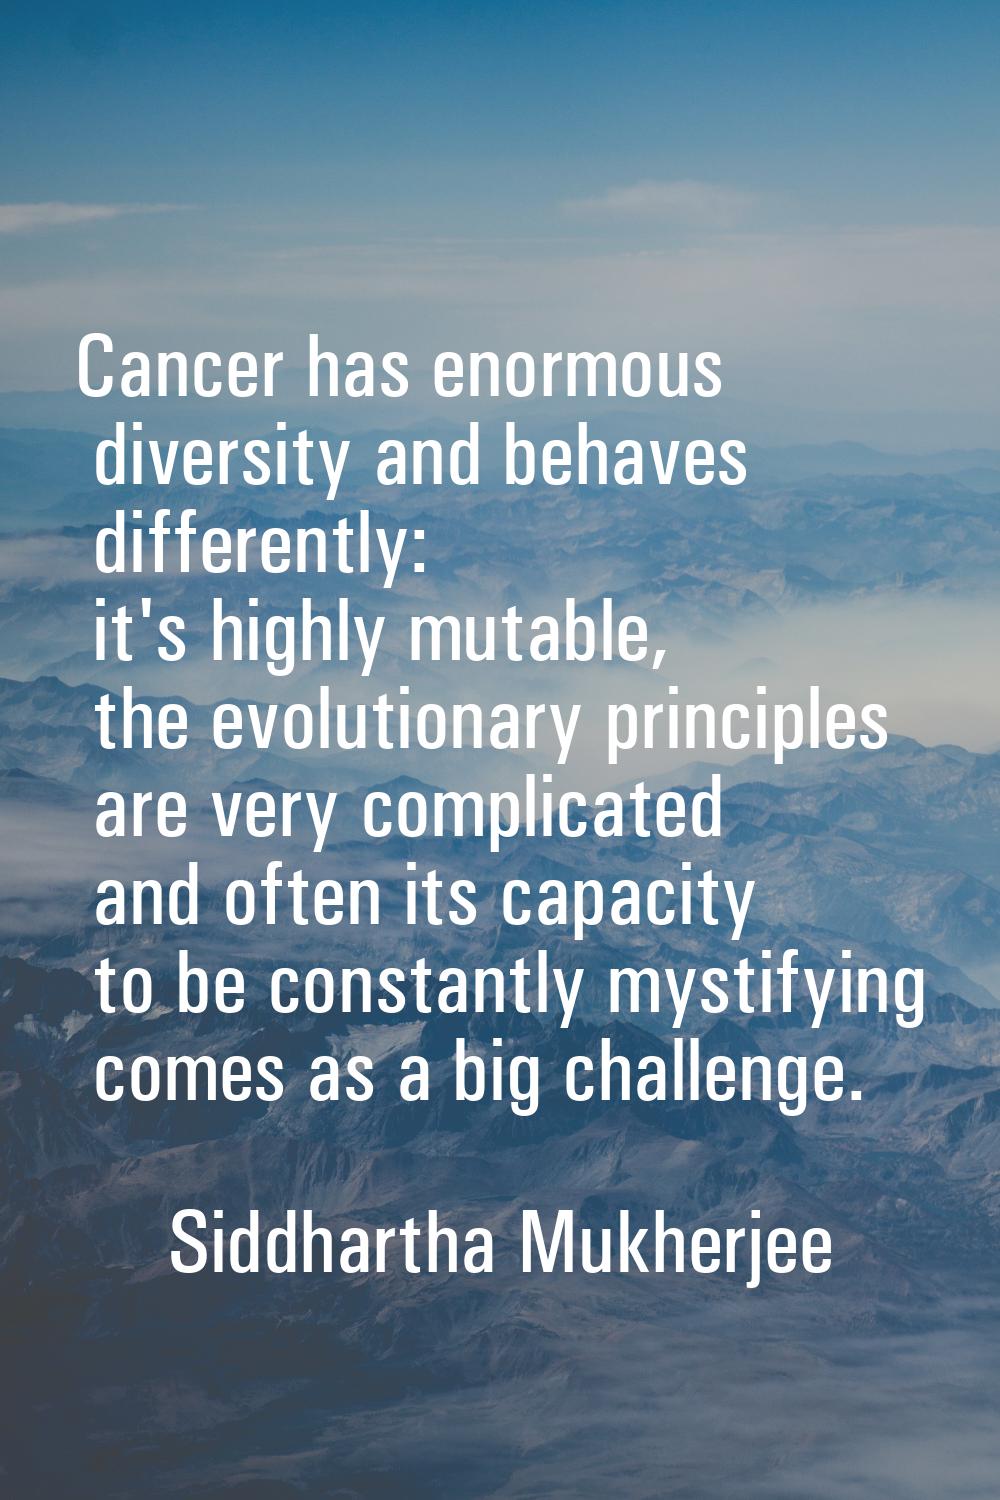 Cancer has enormous diversity and behaves differently: it's highly mutable, the evolutionary princi